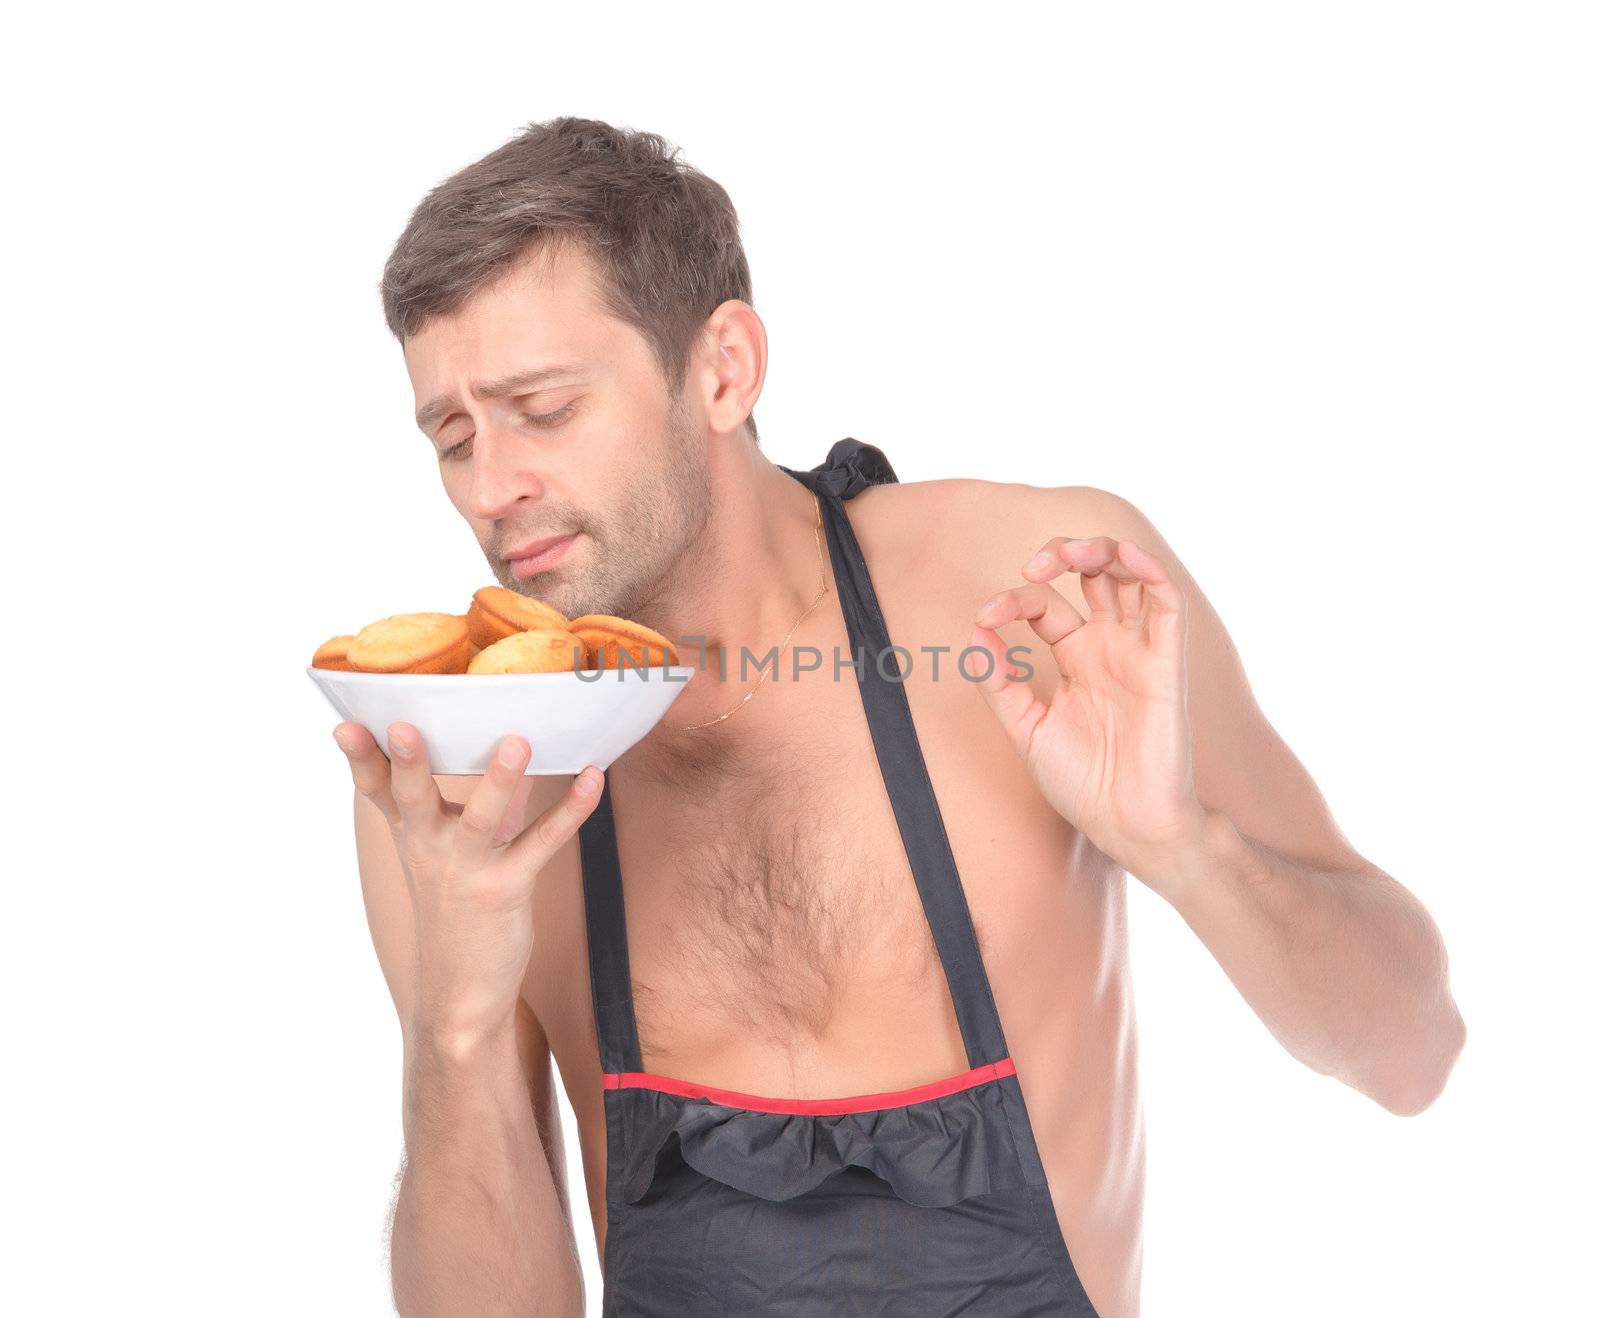 Humorous image of an unshaven shirtless male chef in an apron holding a bowl of cookies and smelling them with a look of pure bliss while making a Superb gesture with his fingers